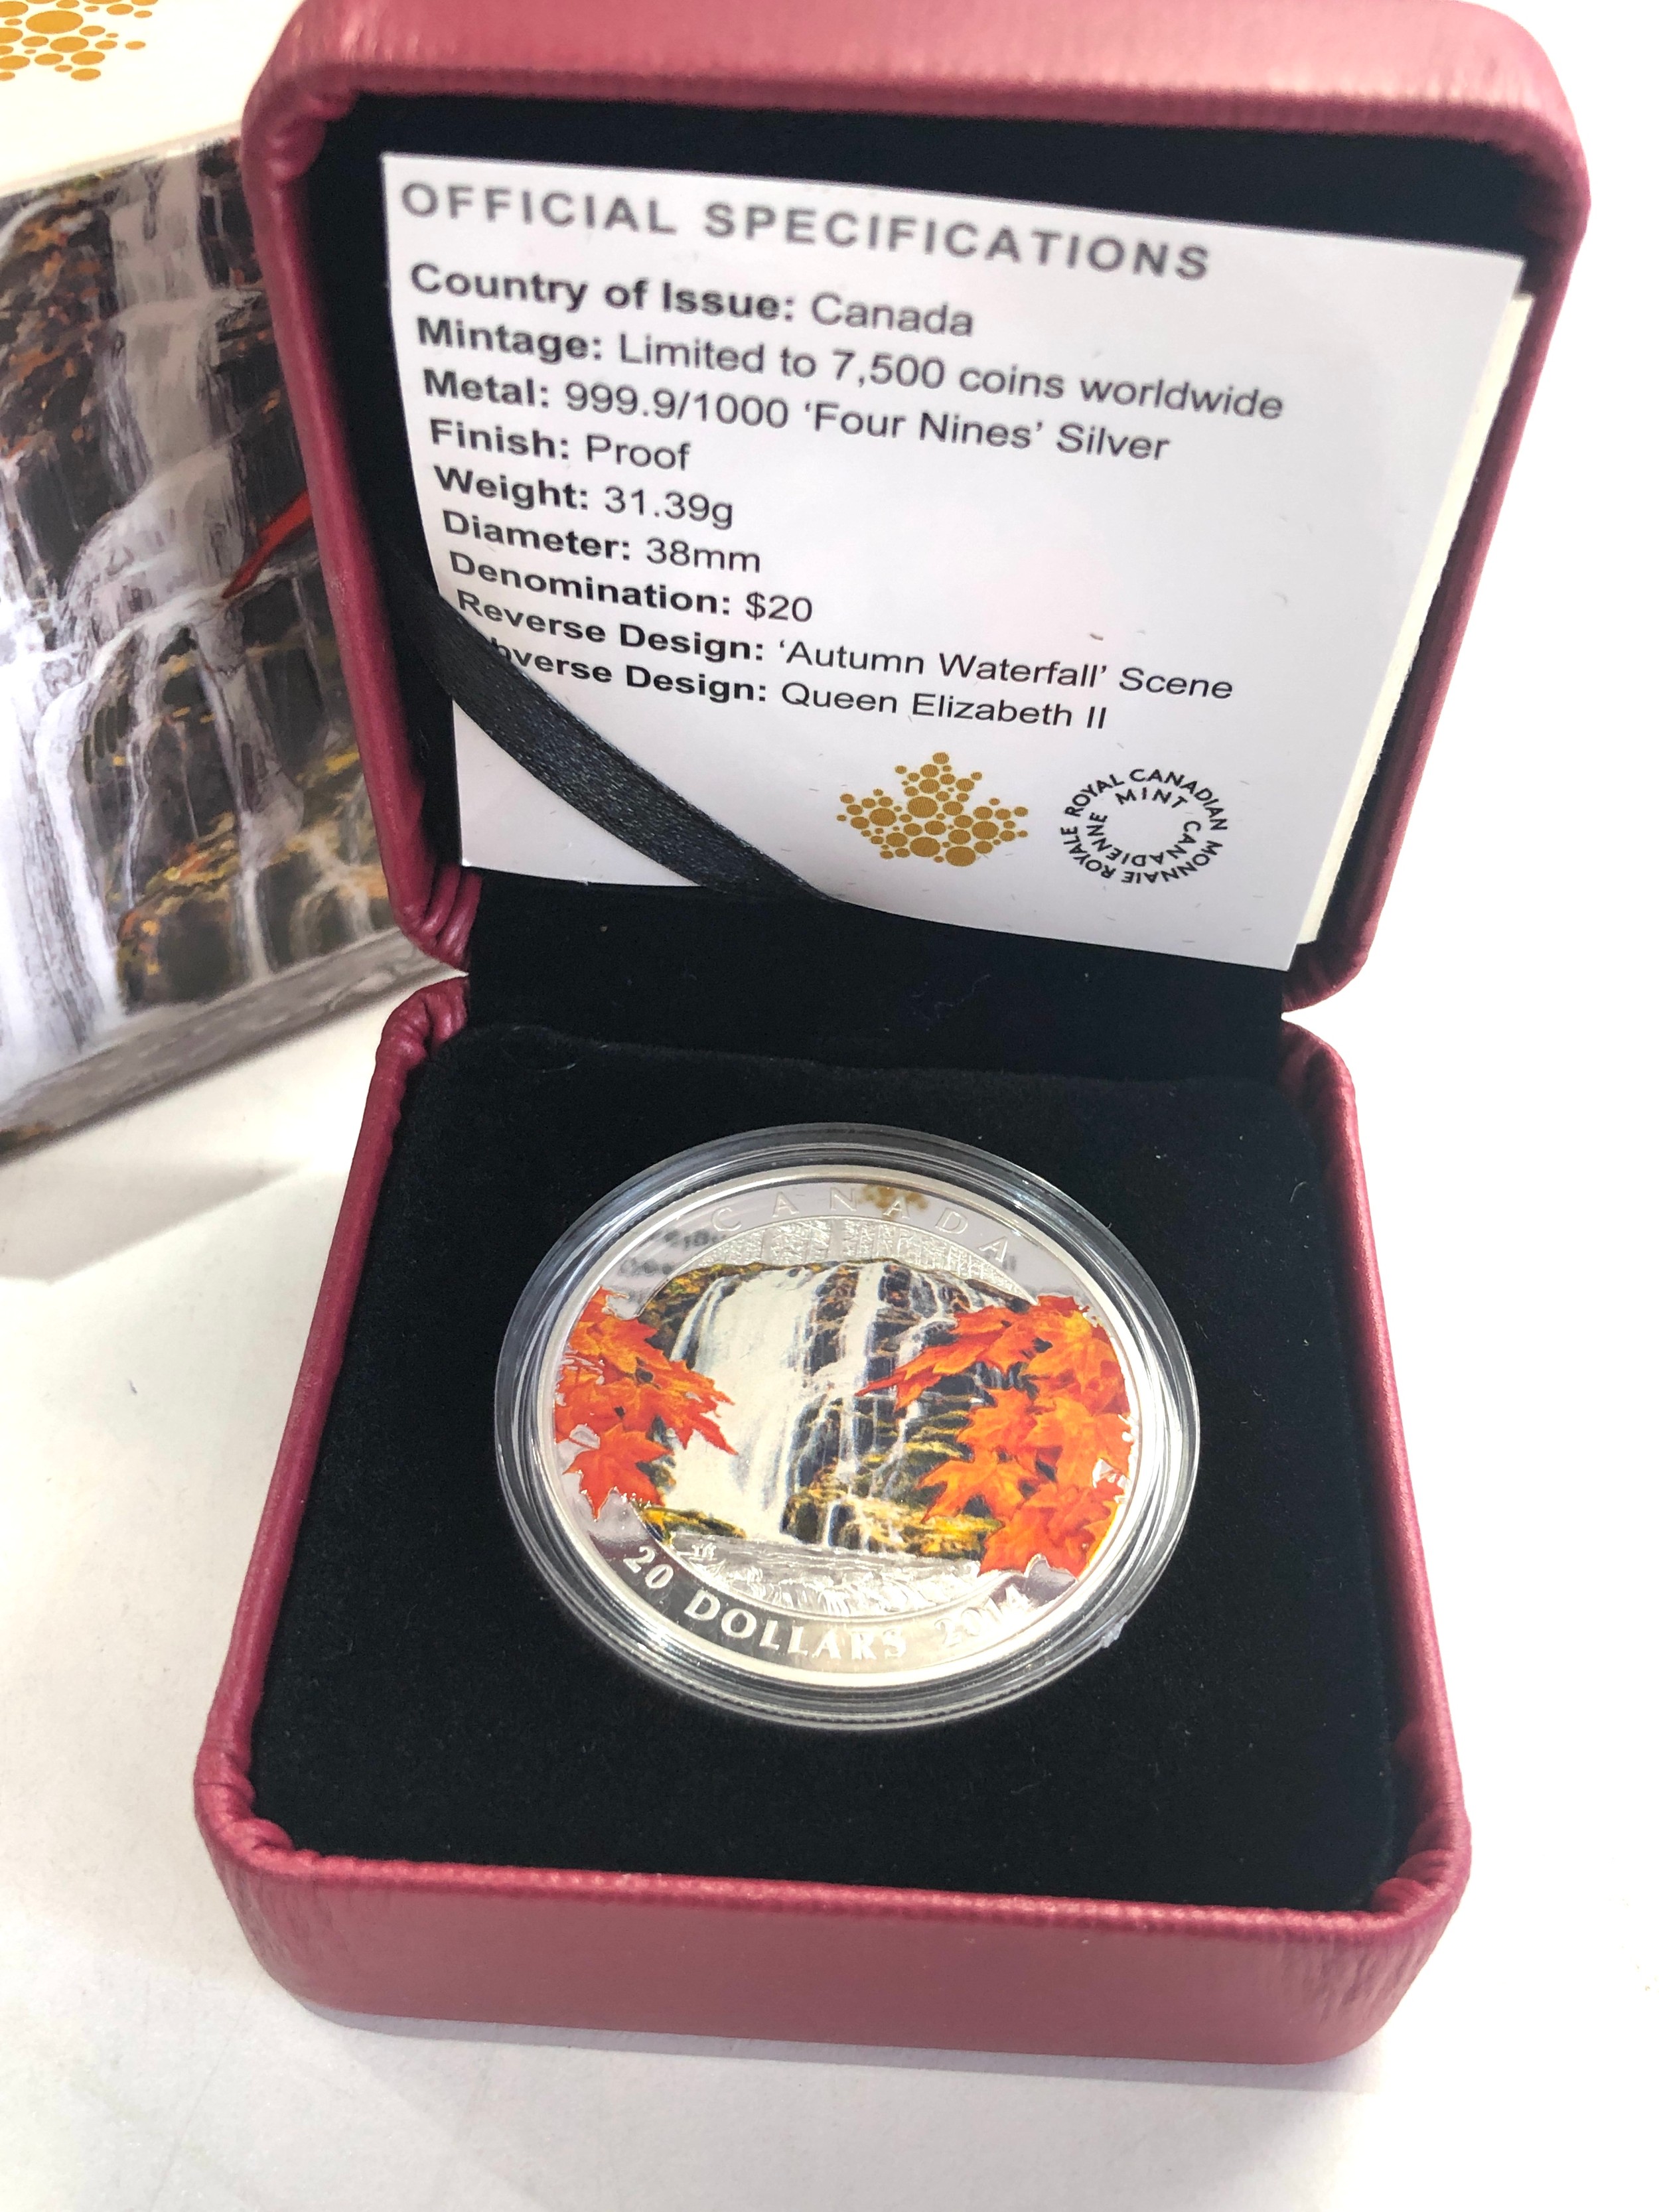 Boxed silver proof limited edition 999. 2014 silver coin cascades of autumn - Image 2 of 5